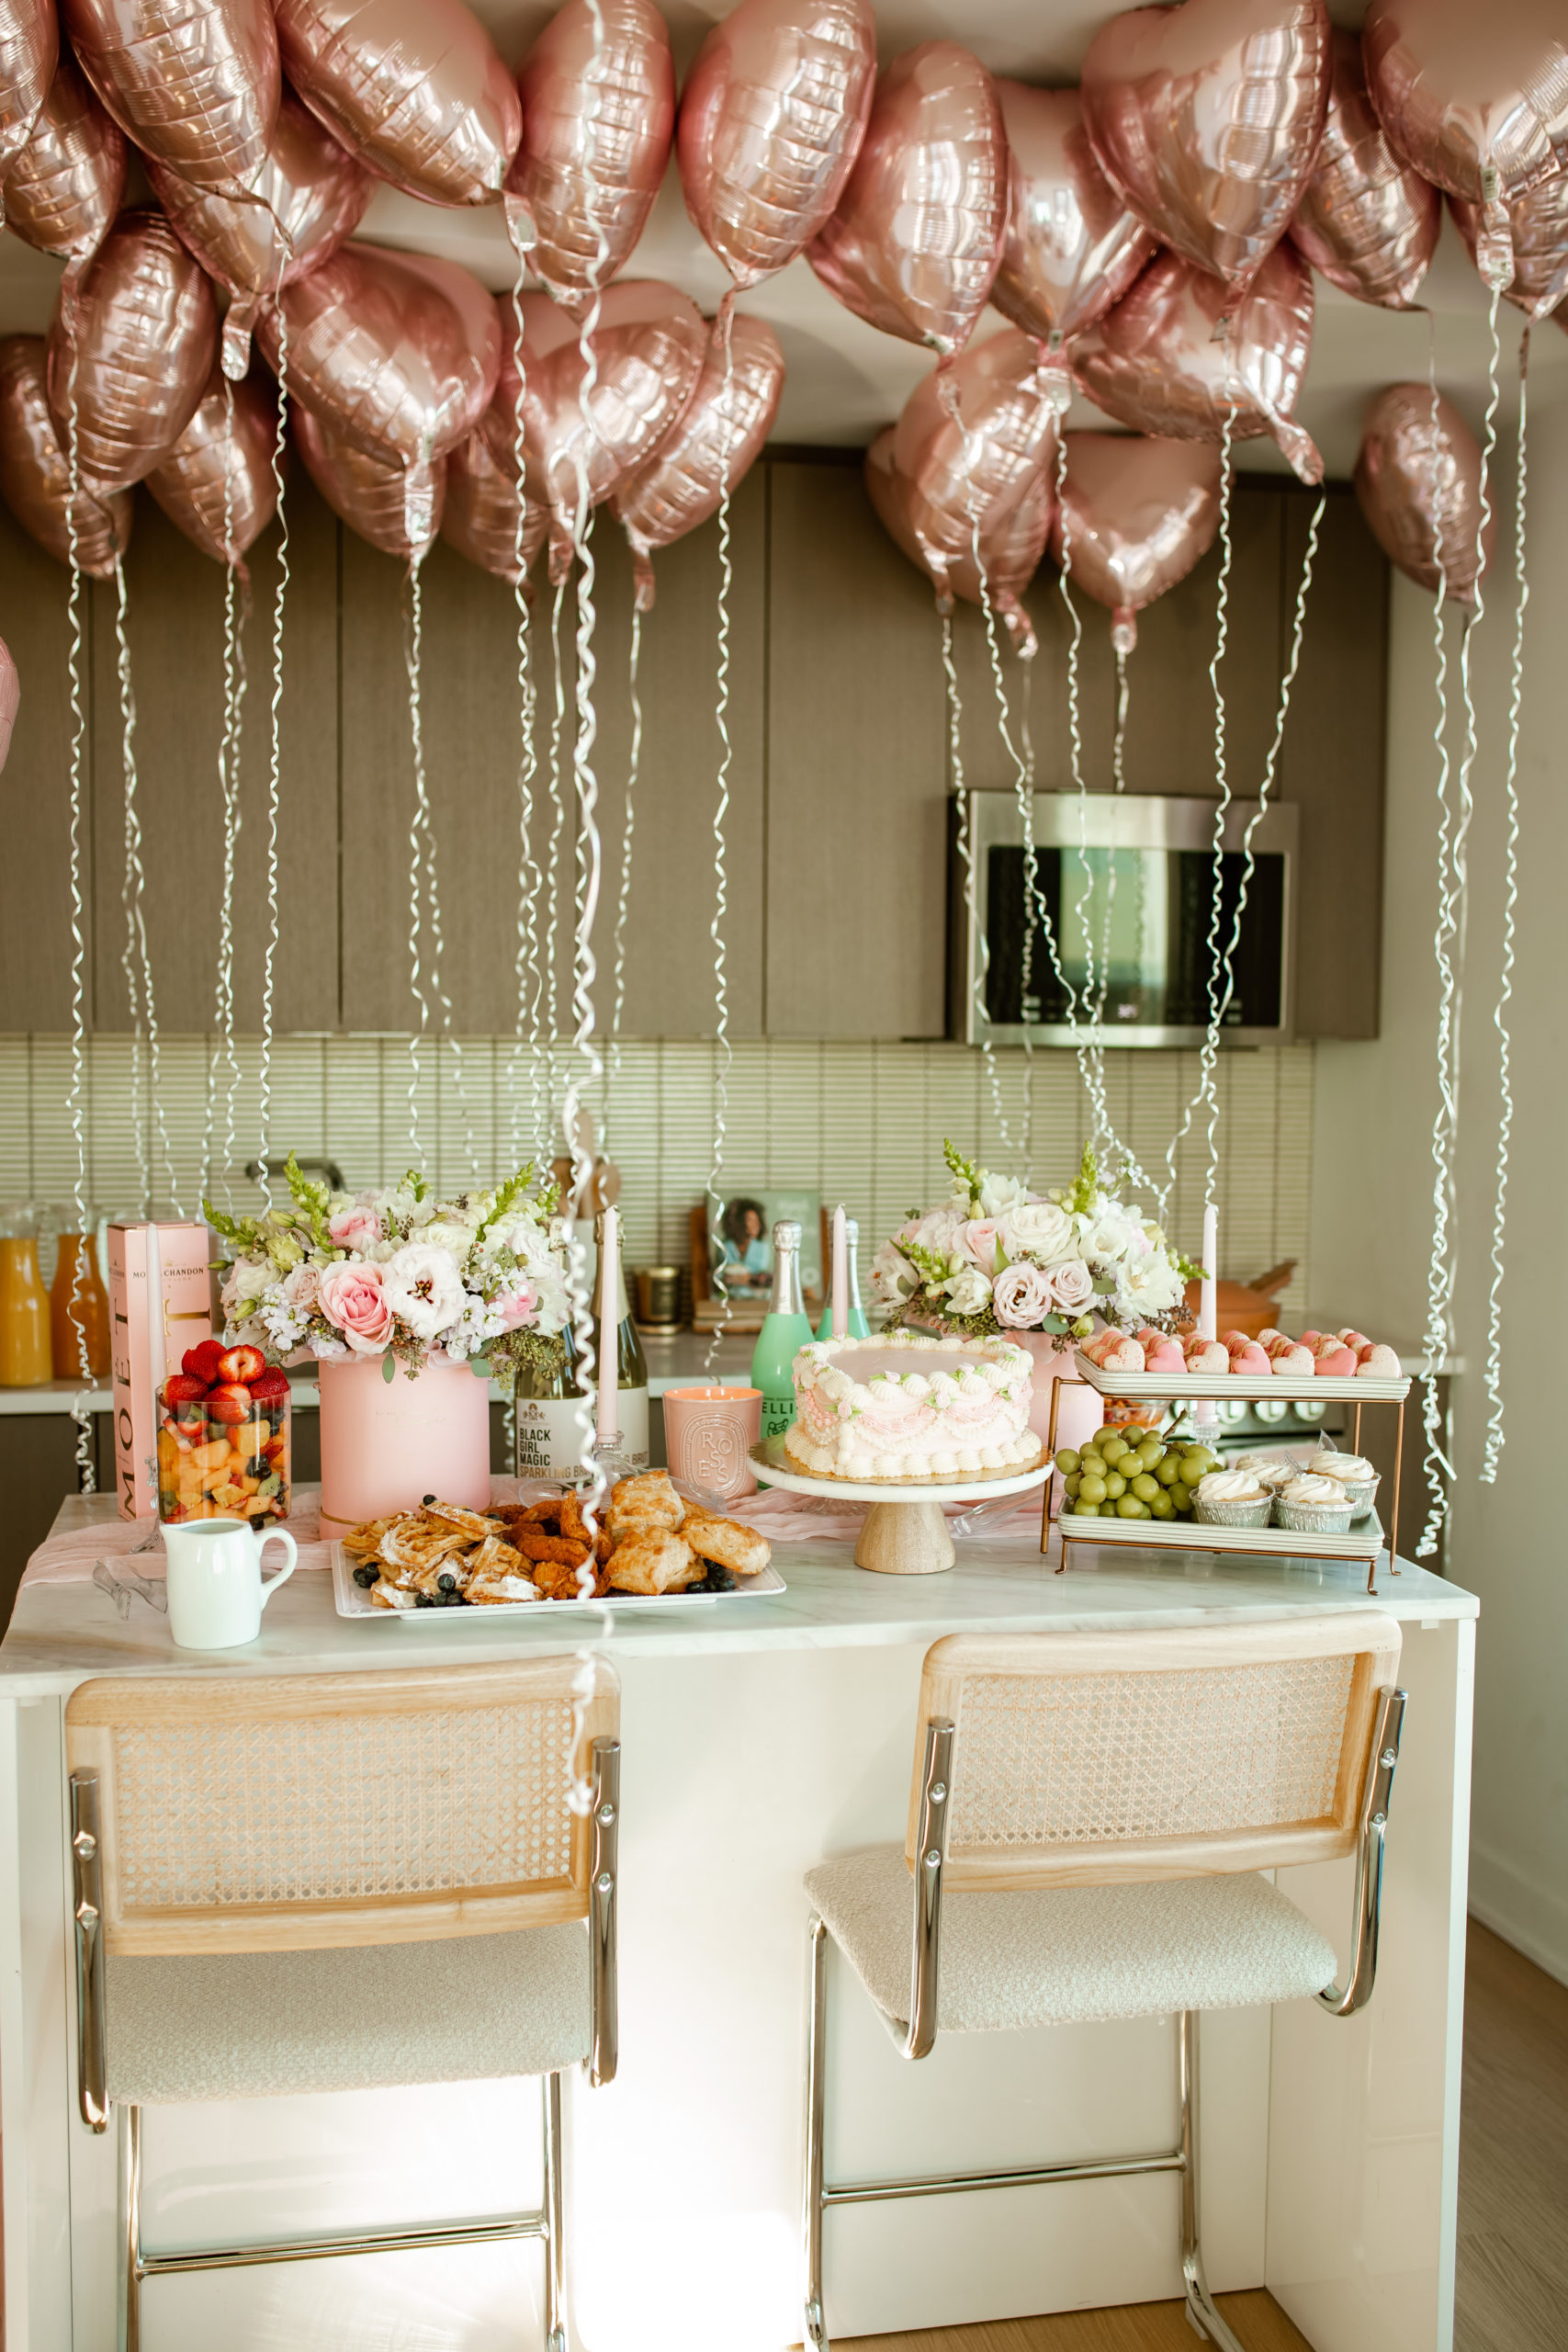 Galentine's Blush Pink Brunch Decorations - The Well Dressed Table